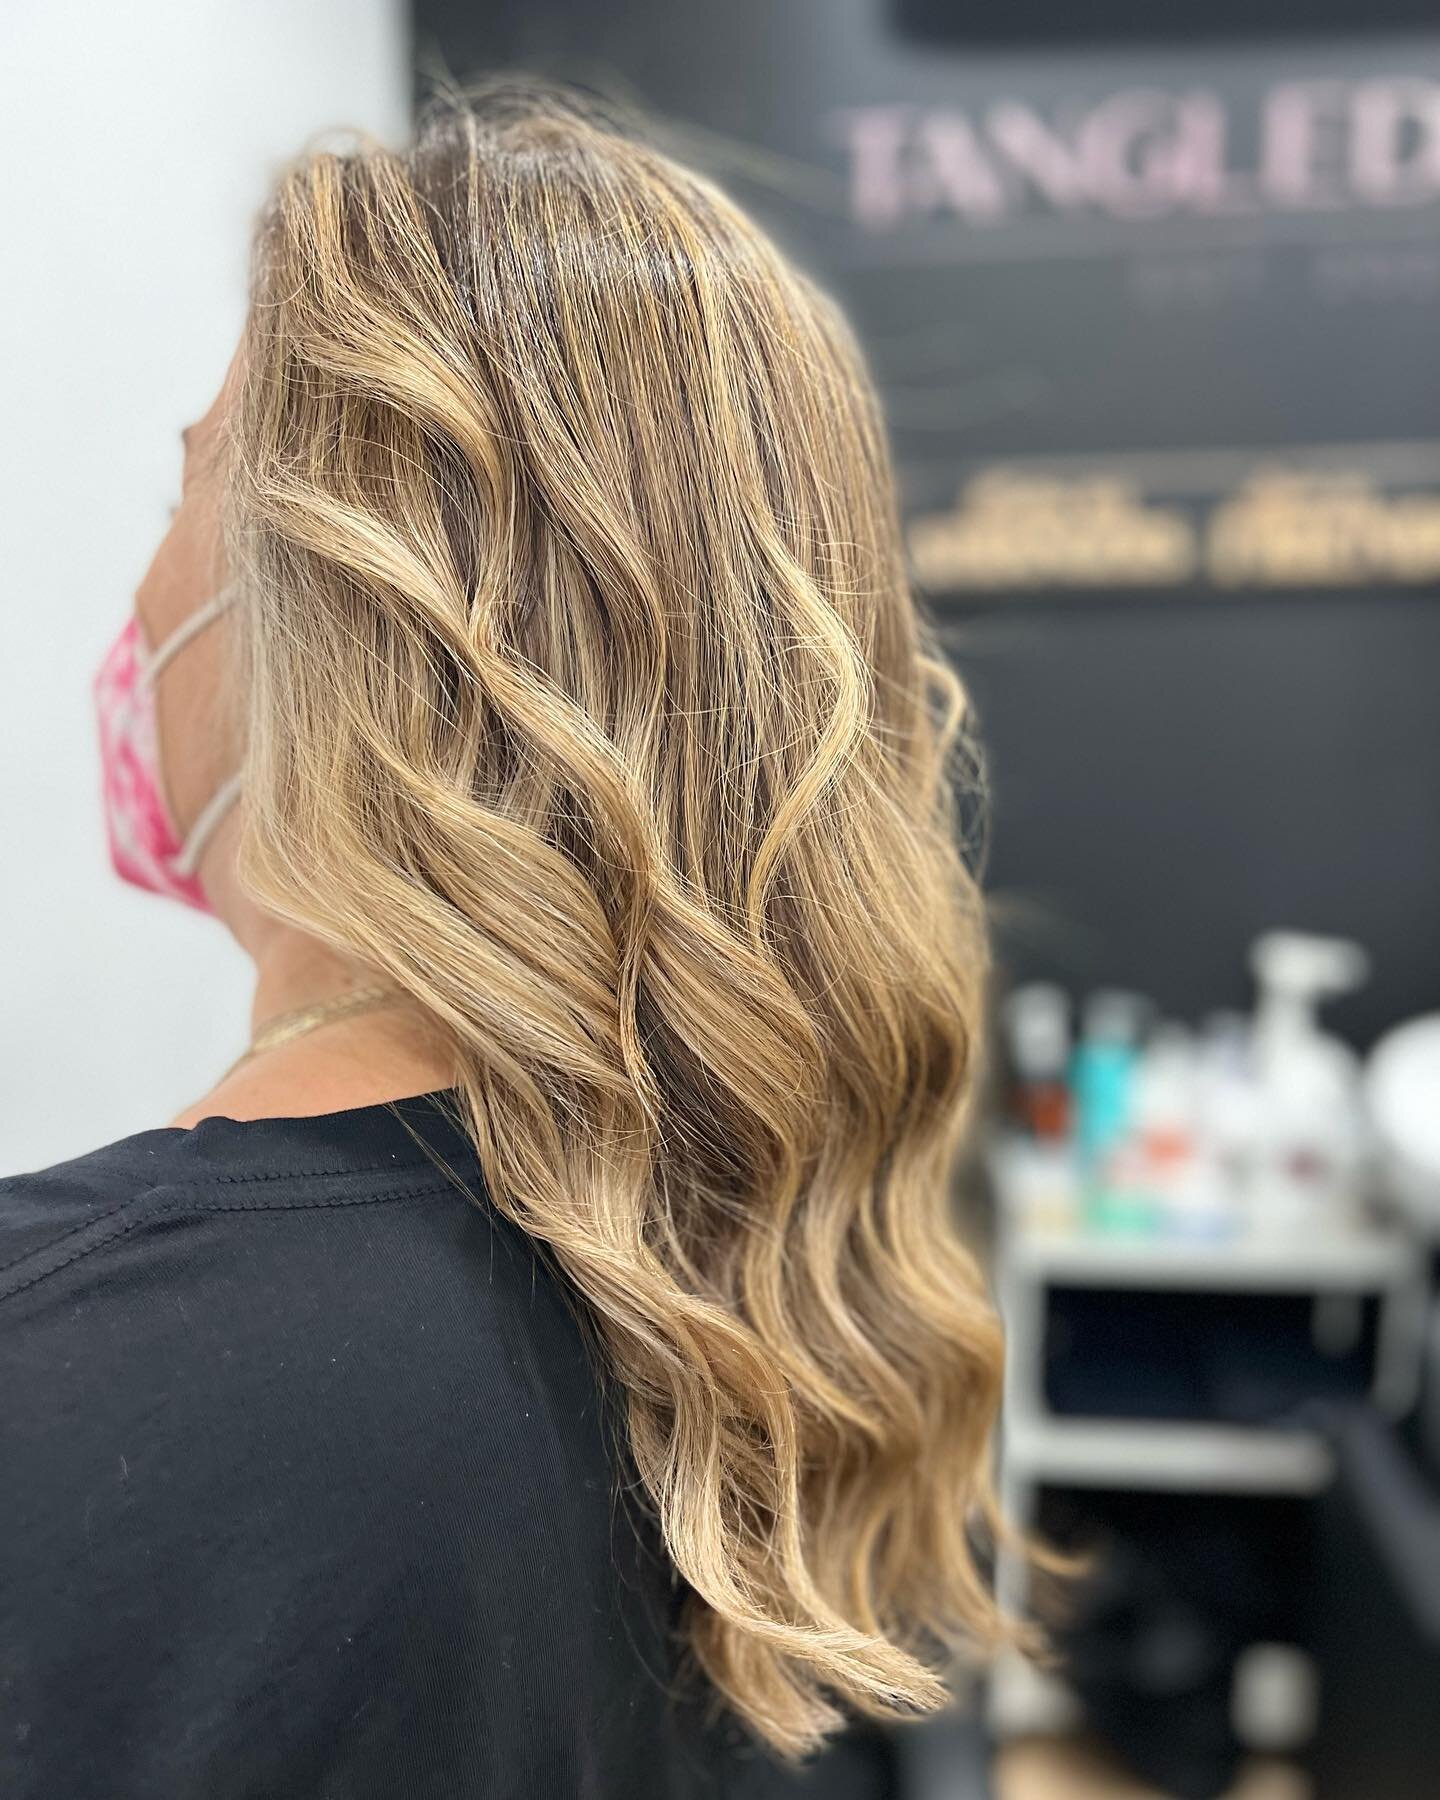 Little cut and highlight action from our newest addition, Denenne. Get in her schedule already 😘. #livedincolor #redkenshadeseq #rootmelt #windsorterracebrooklyn #windsorterracehair